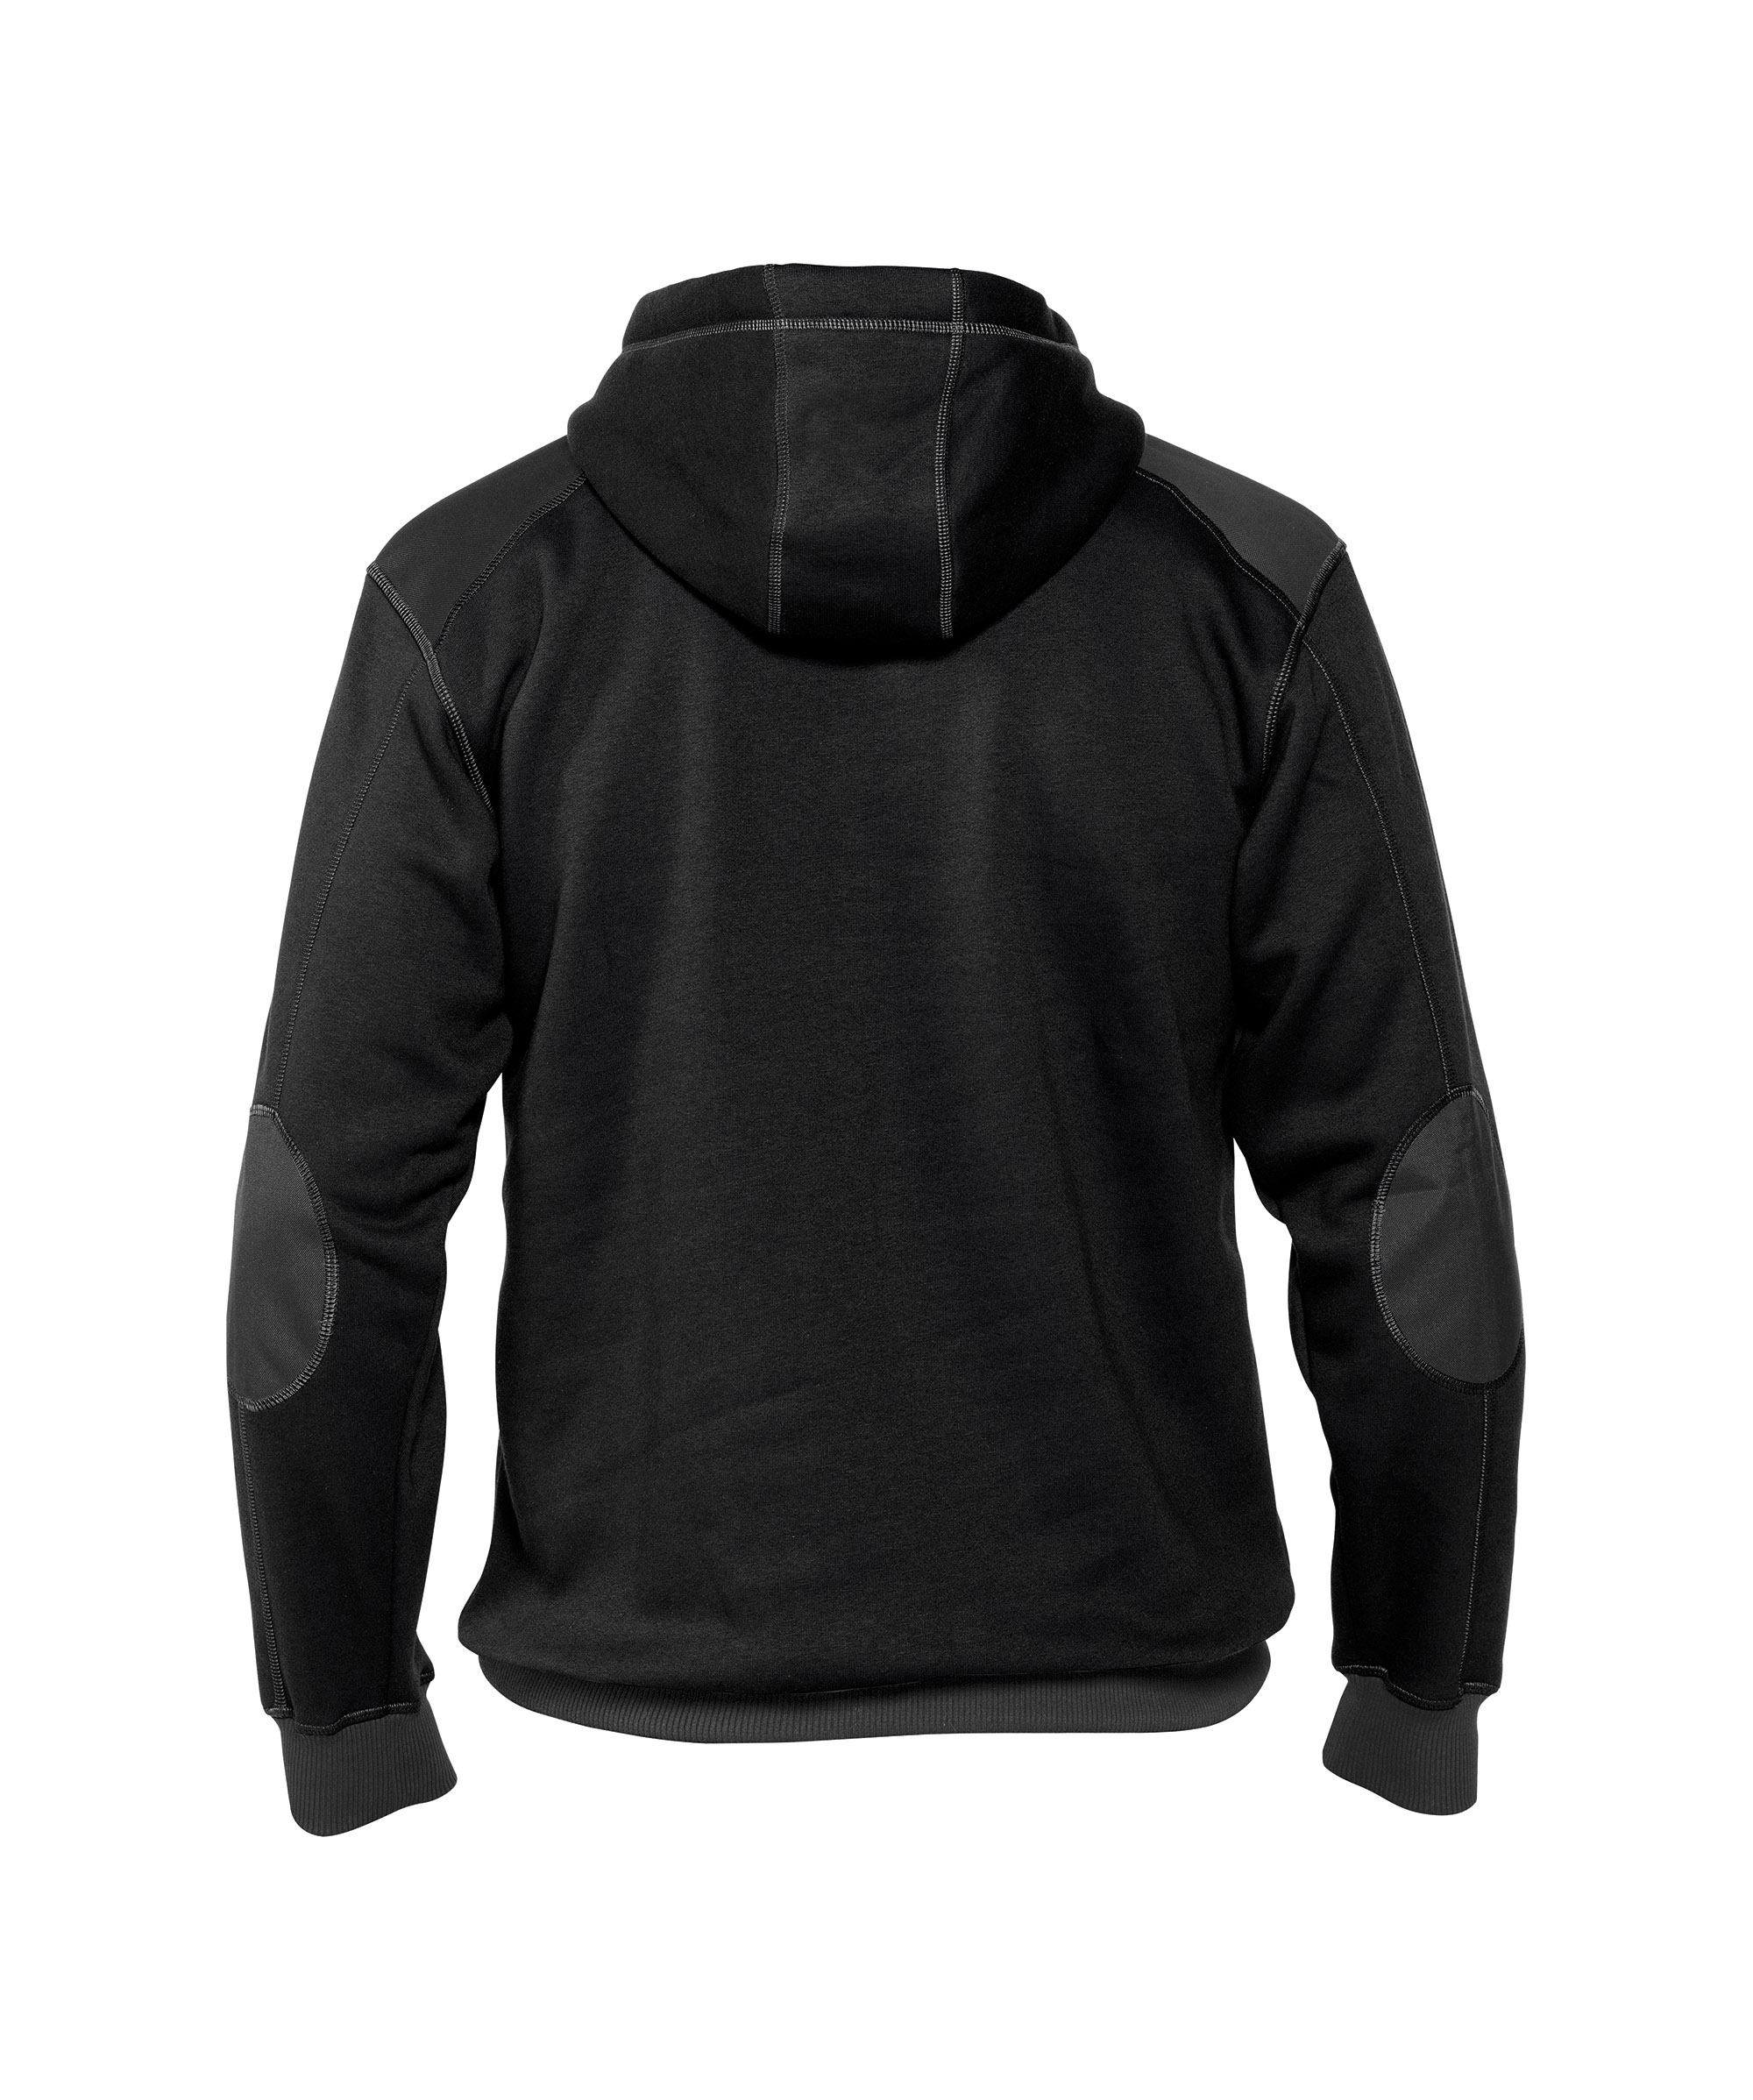 indy_hooded-sweatshirt-reinforced-with-canvas_black-anthracite-grey_back.jpg